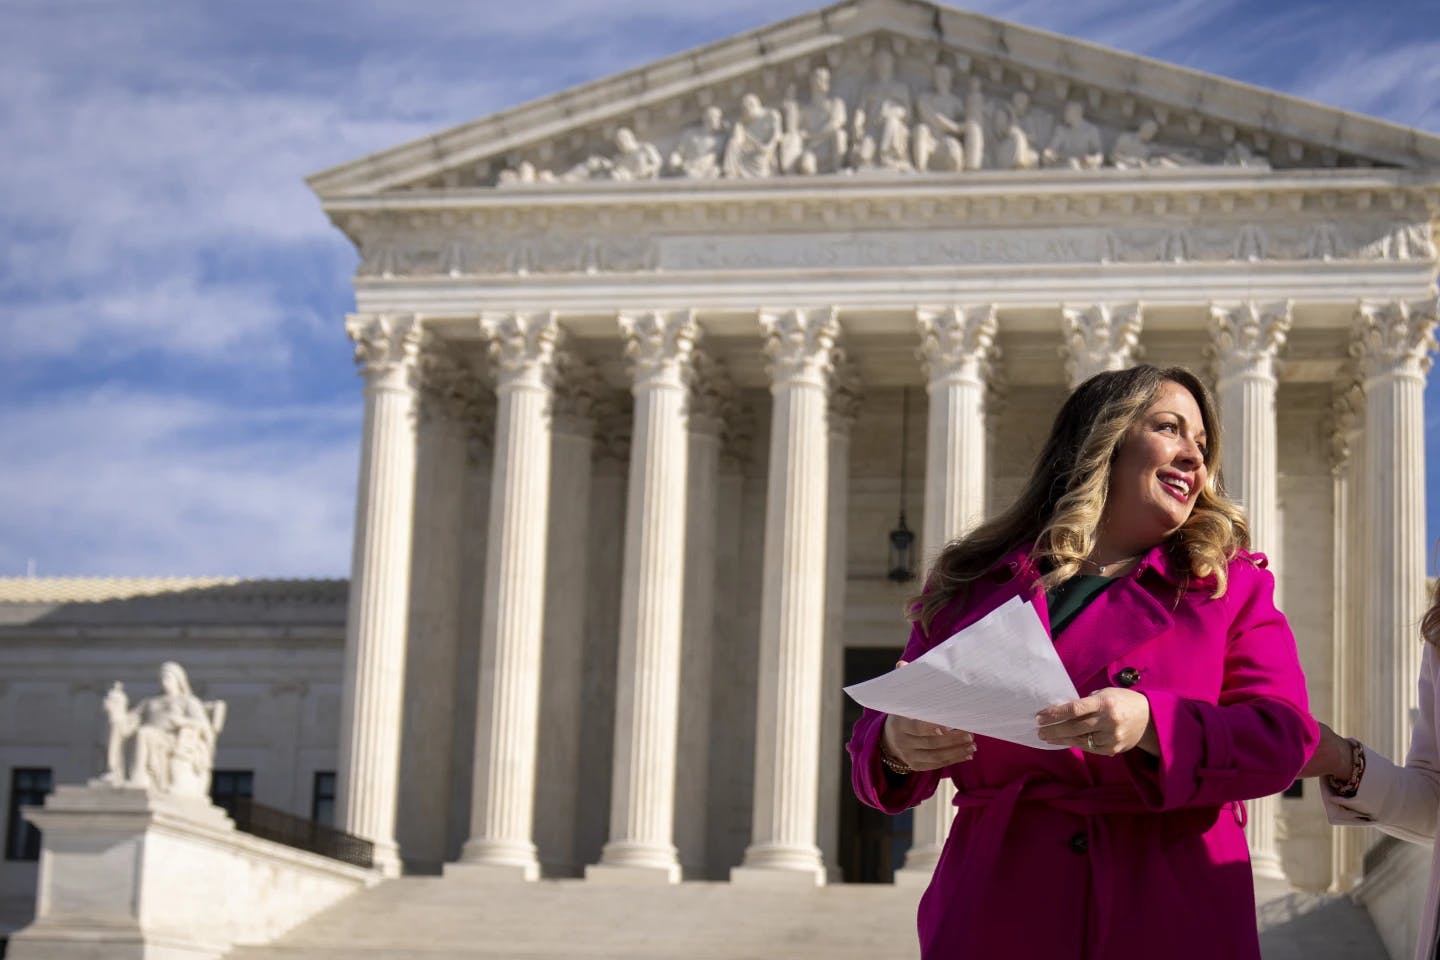 Christian web designer Lorie Smith in front of the Supreme Court